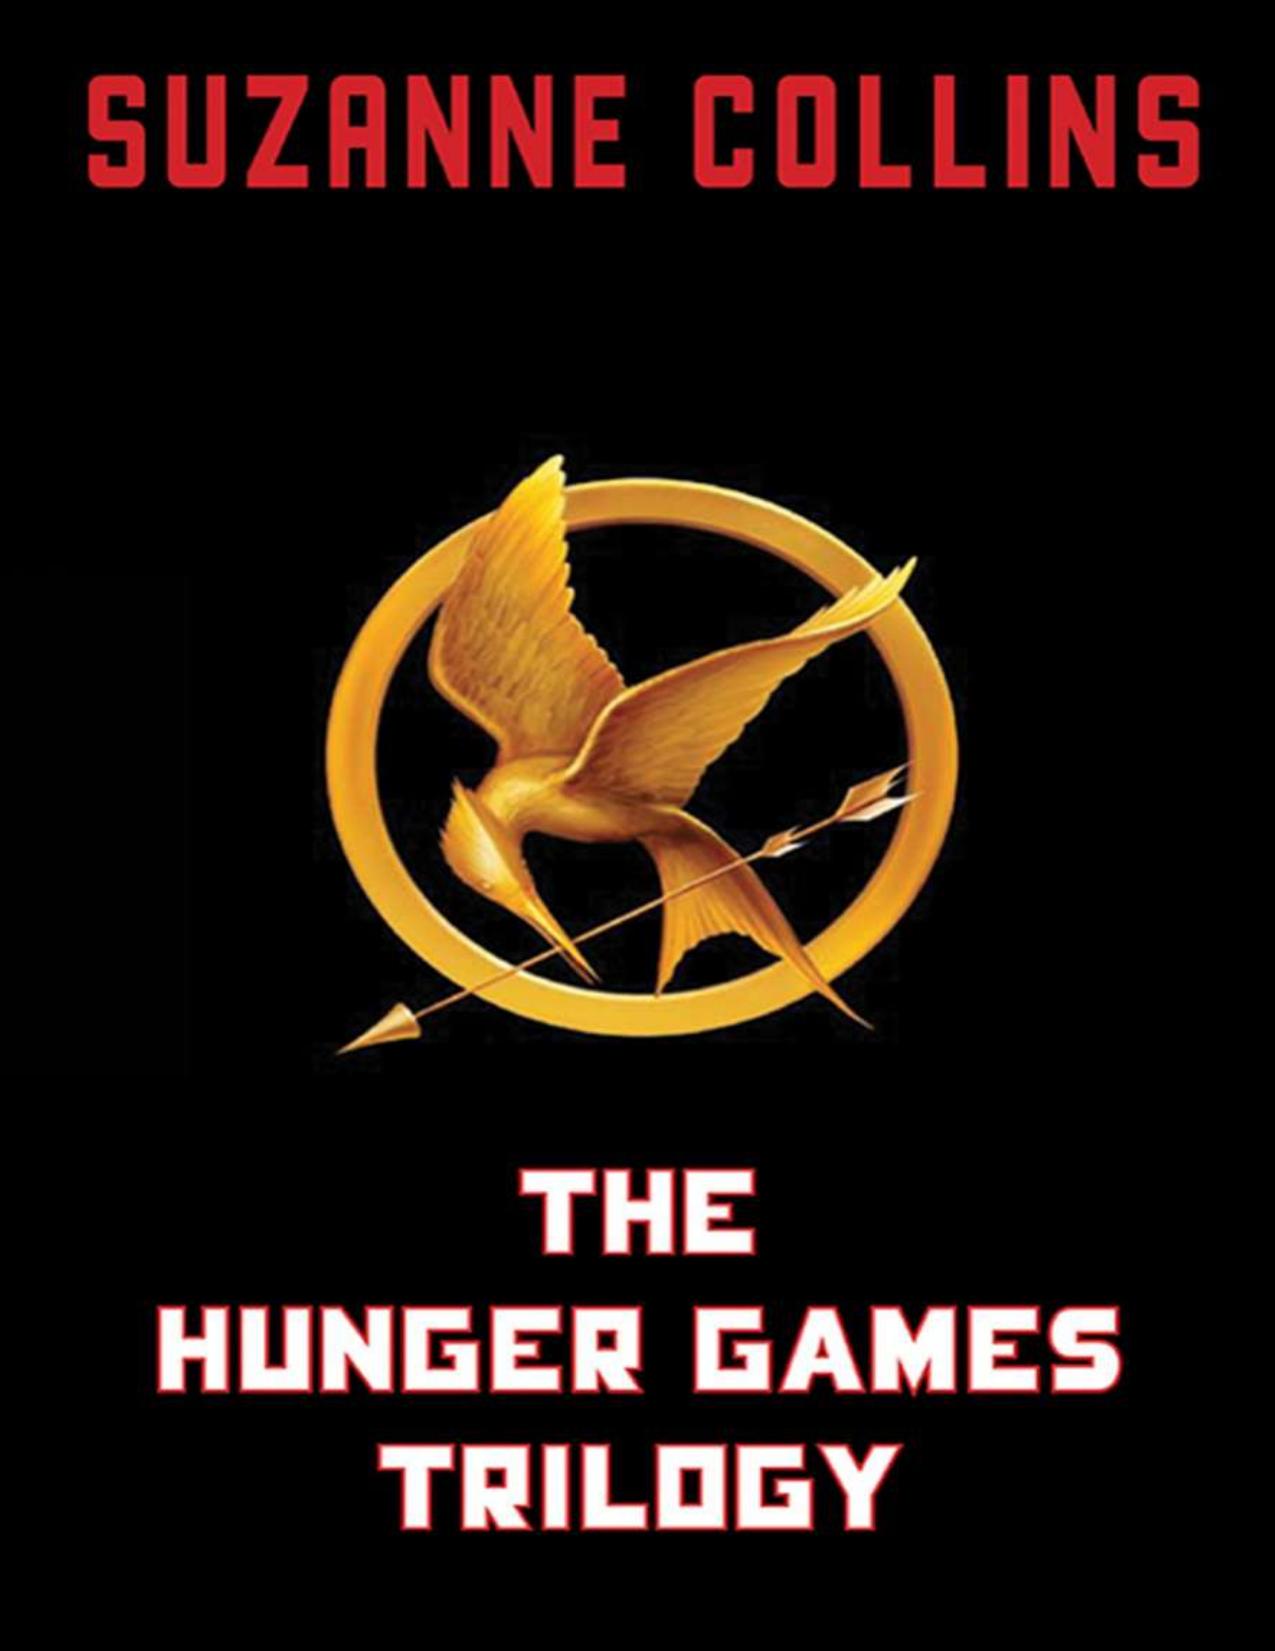 The Hunger Games Trilogy: The Hunger Games, Catching Fire, Mockingjay